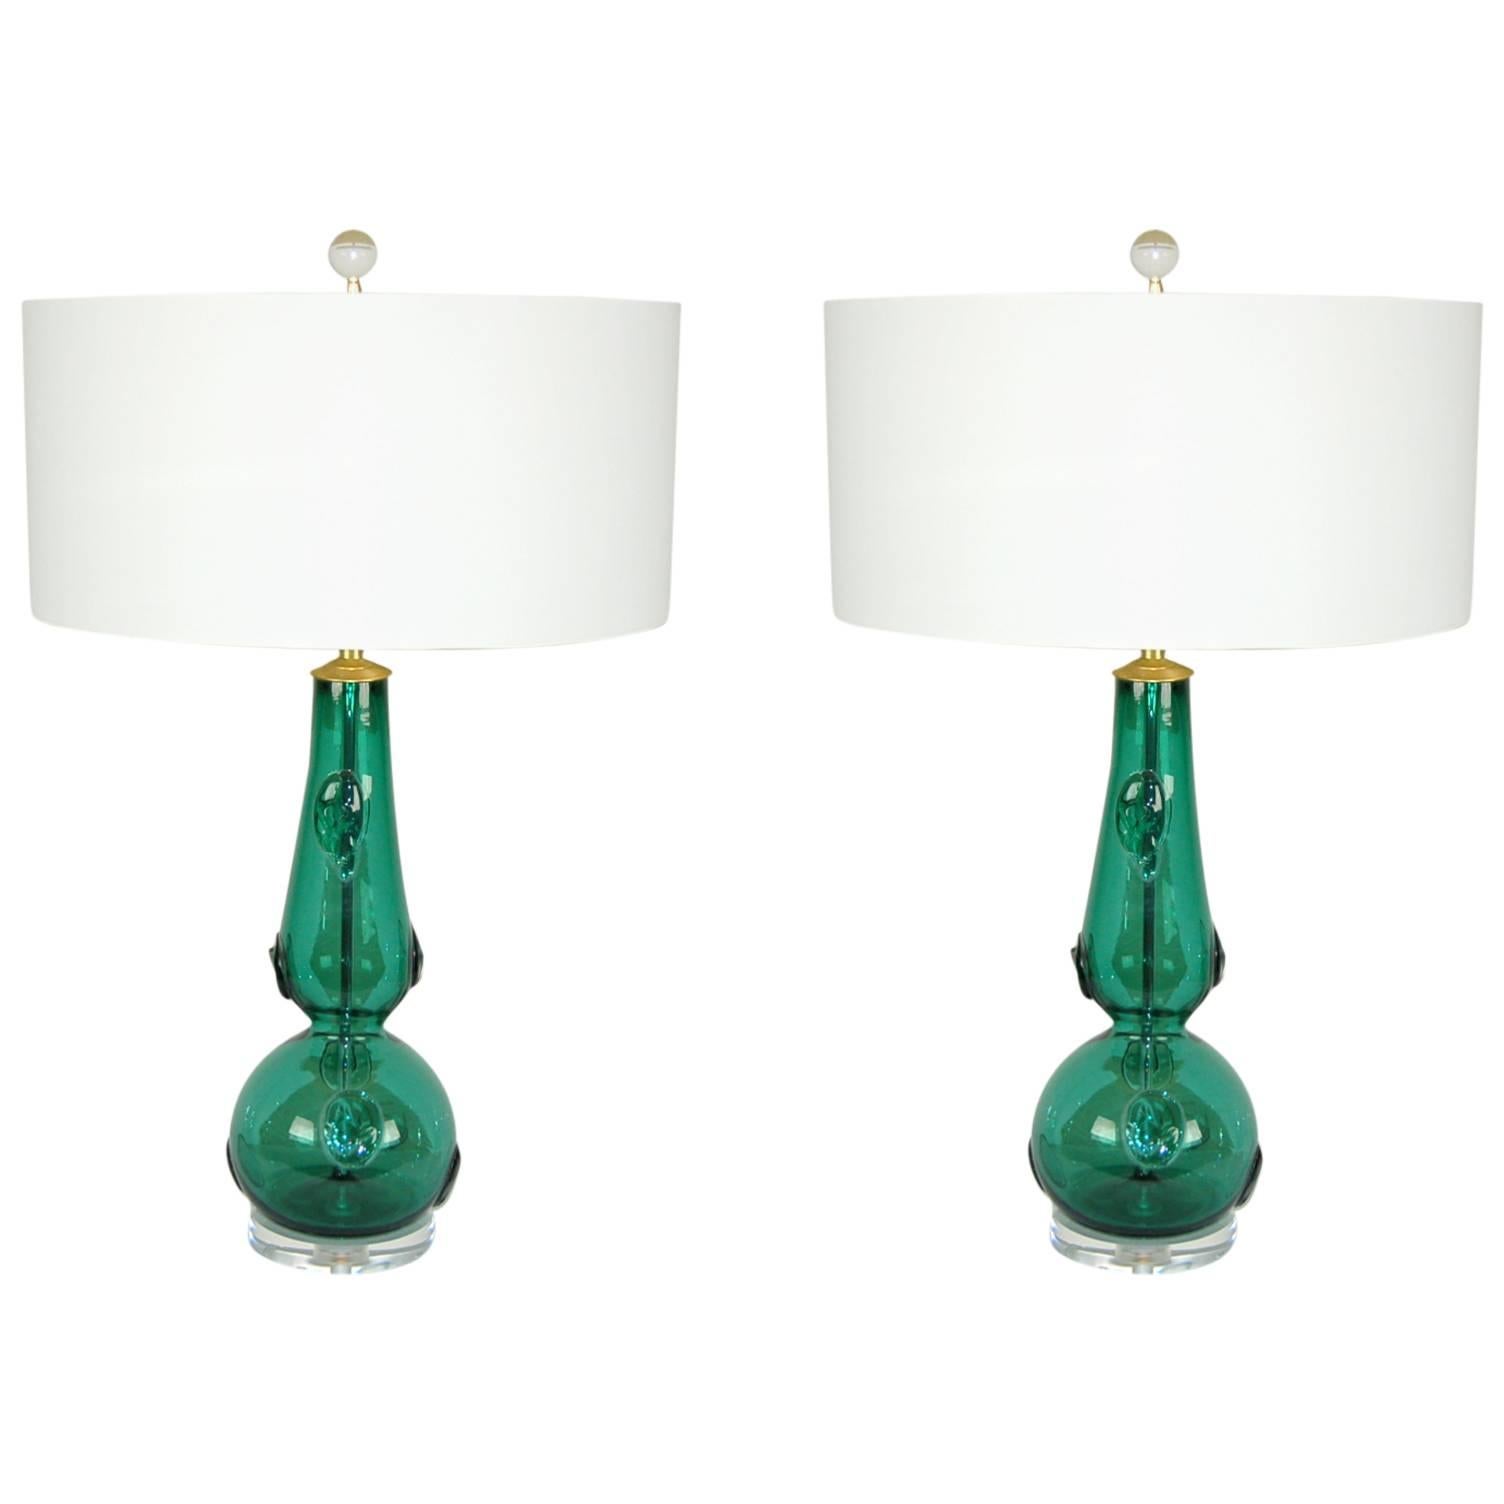 Matched Pair of Vintage Murano Lamps in Jade Green with Large Prunts For Sale